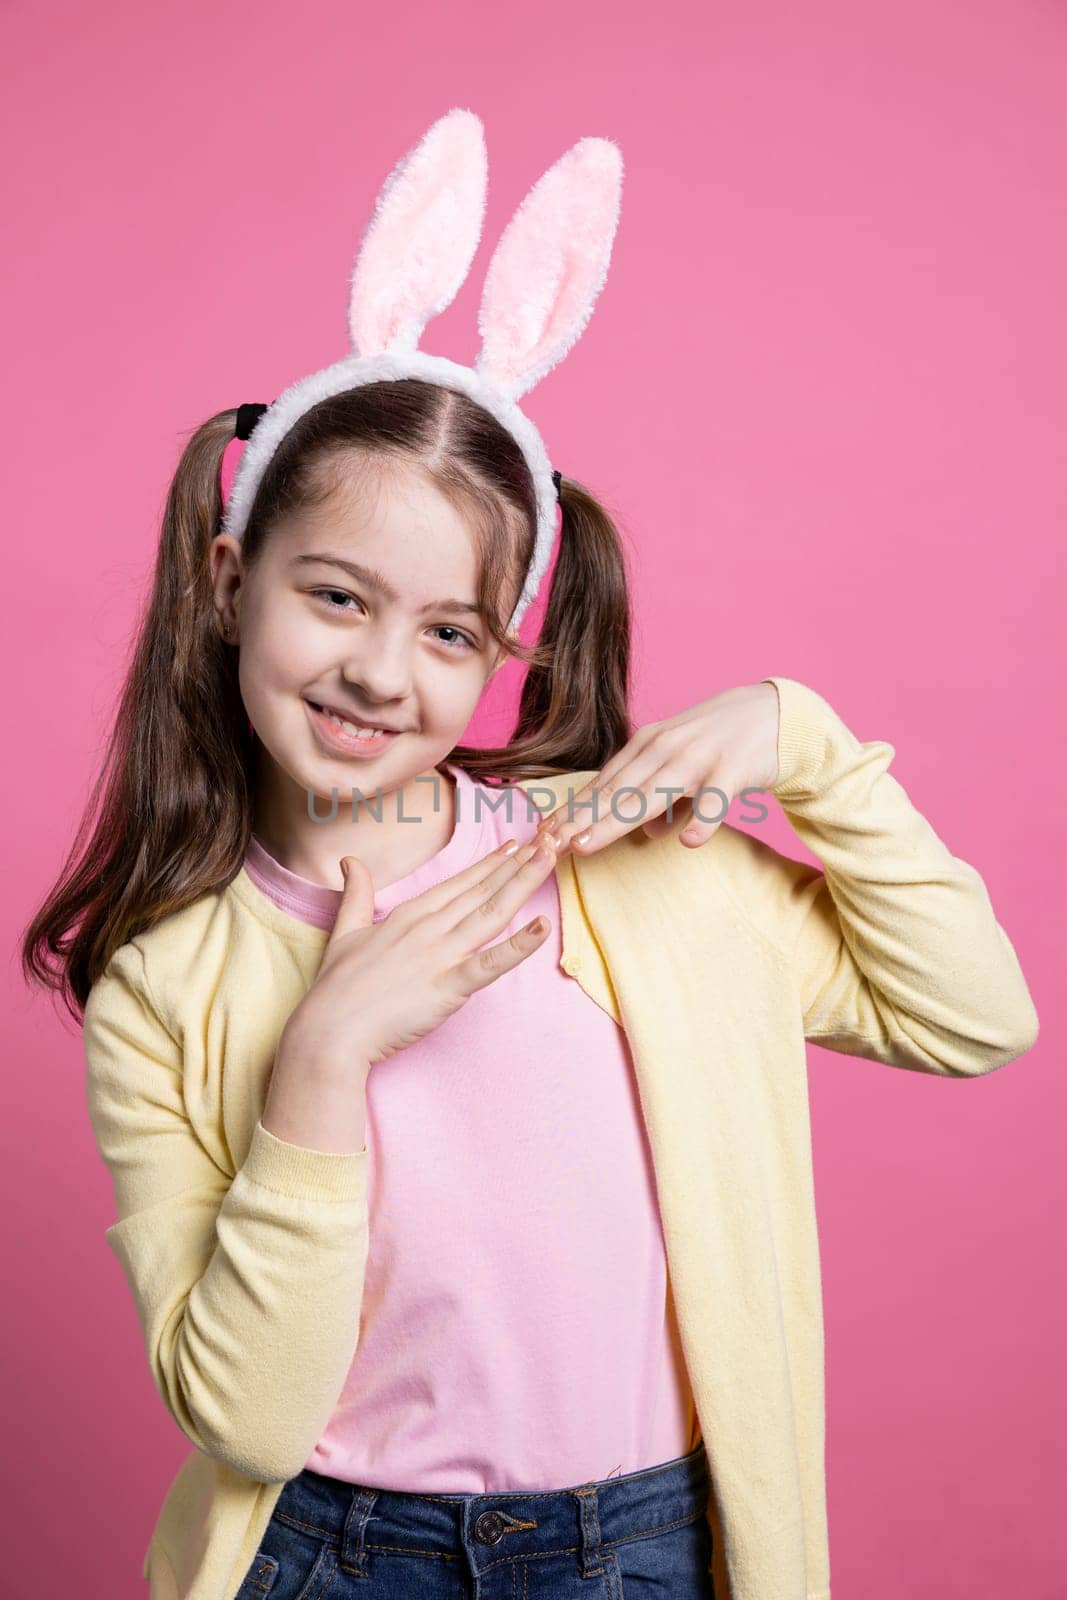 Cute young girl dancing and fooling around on camera, wearing bunny ears and pigtails over pink background. Carefree schoolgirl feeling joyful and excited about easter celebration in studio.